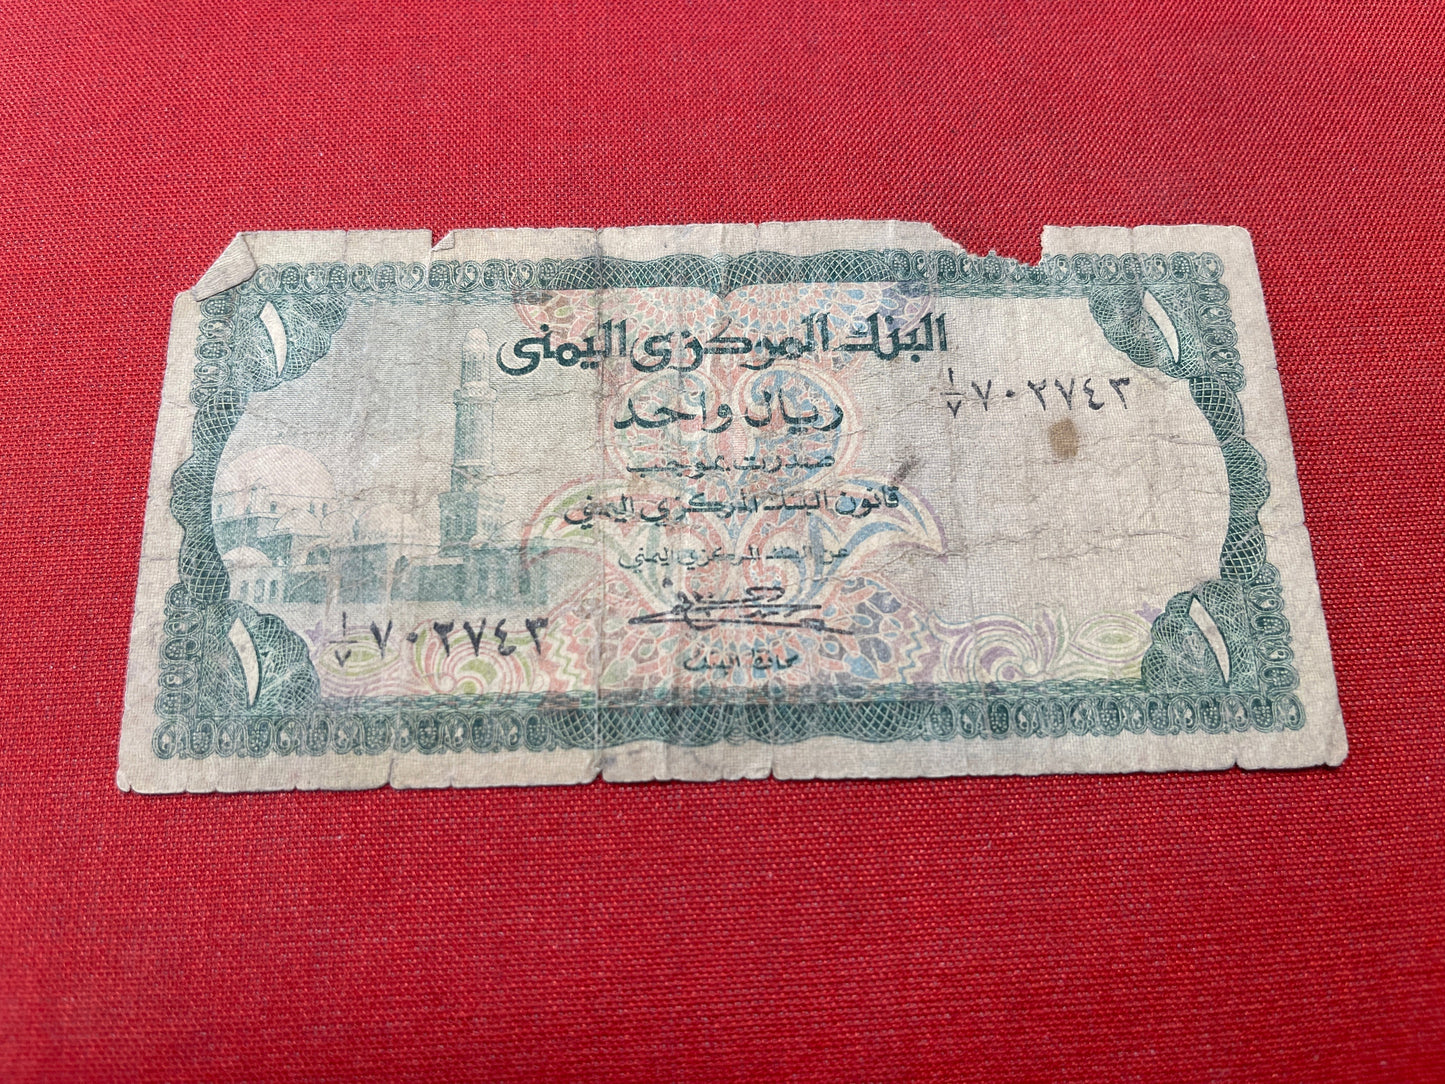 Central Bank of Yemen One Rial